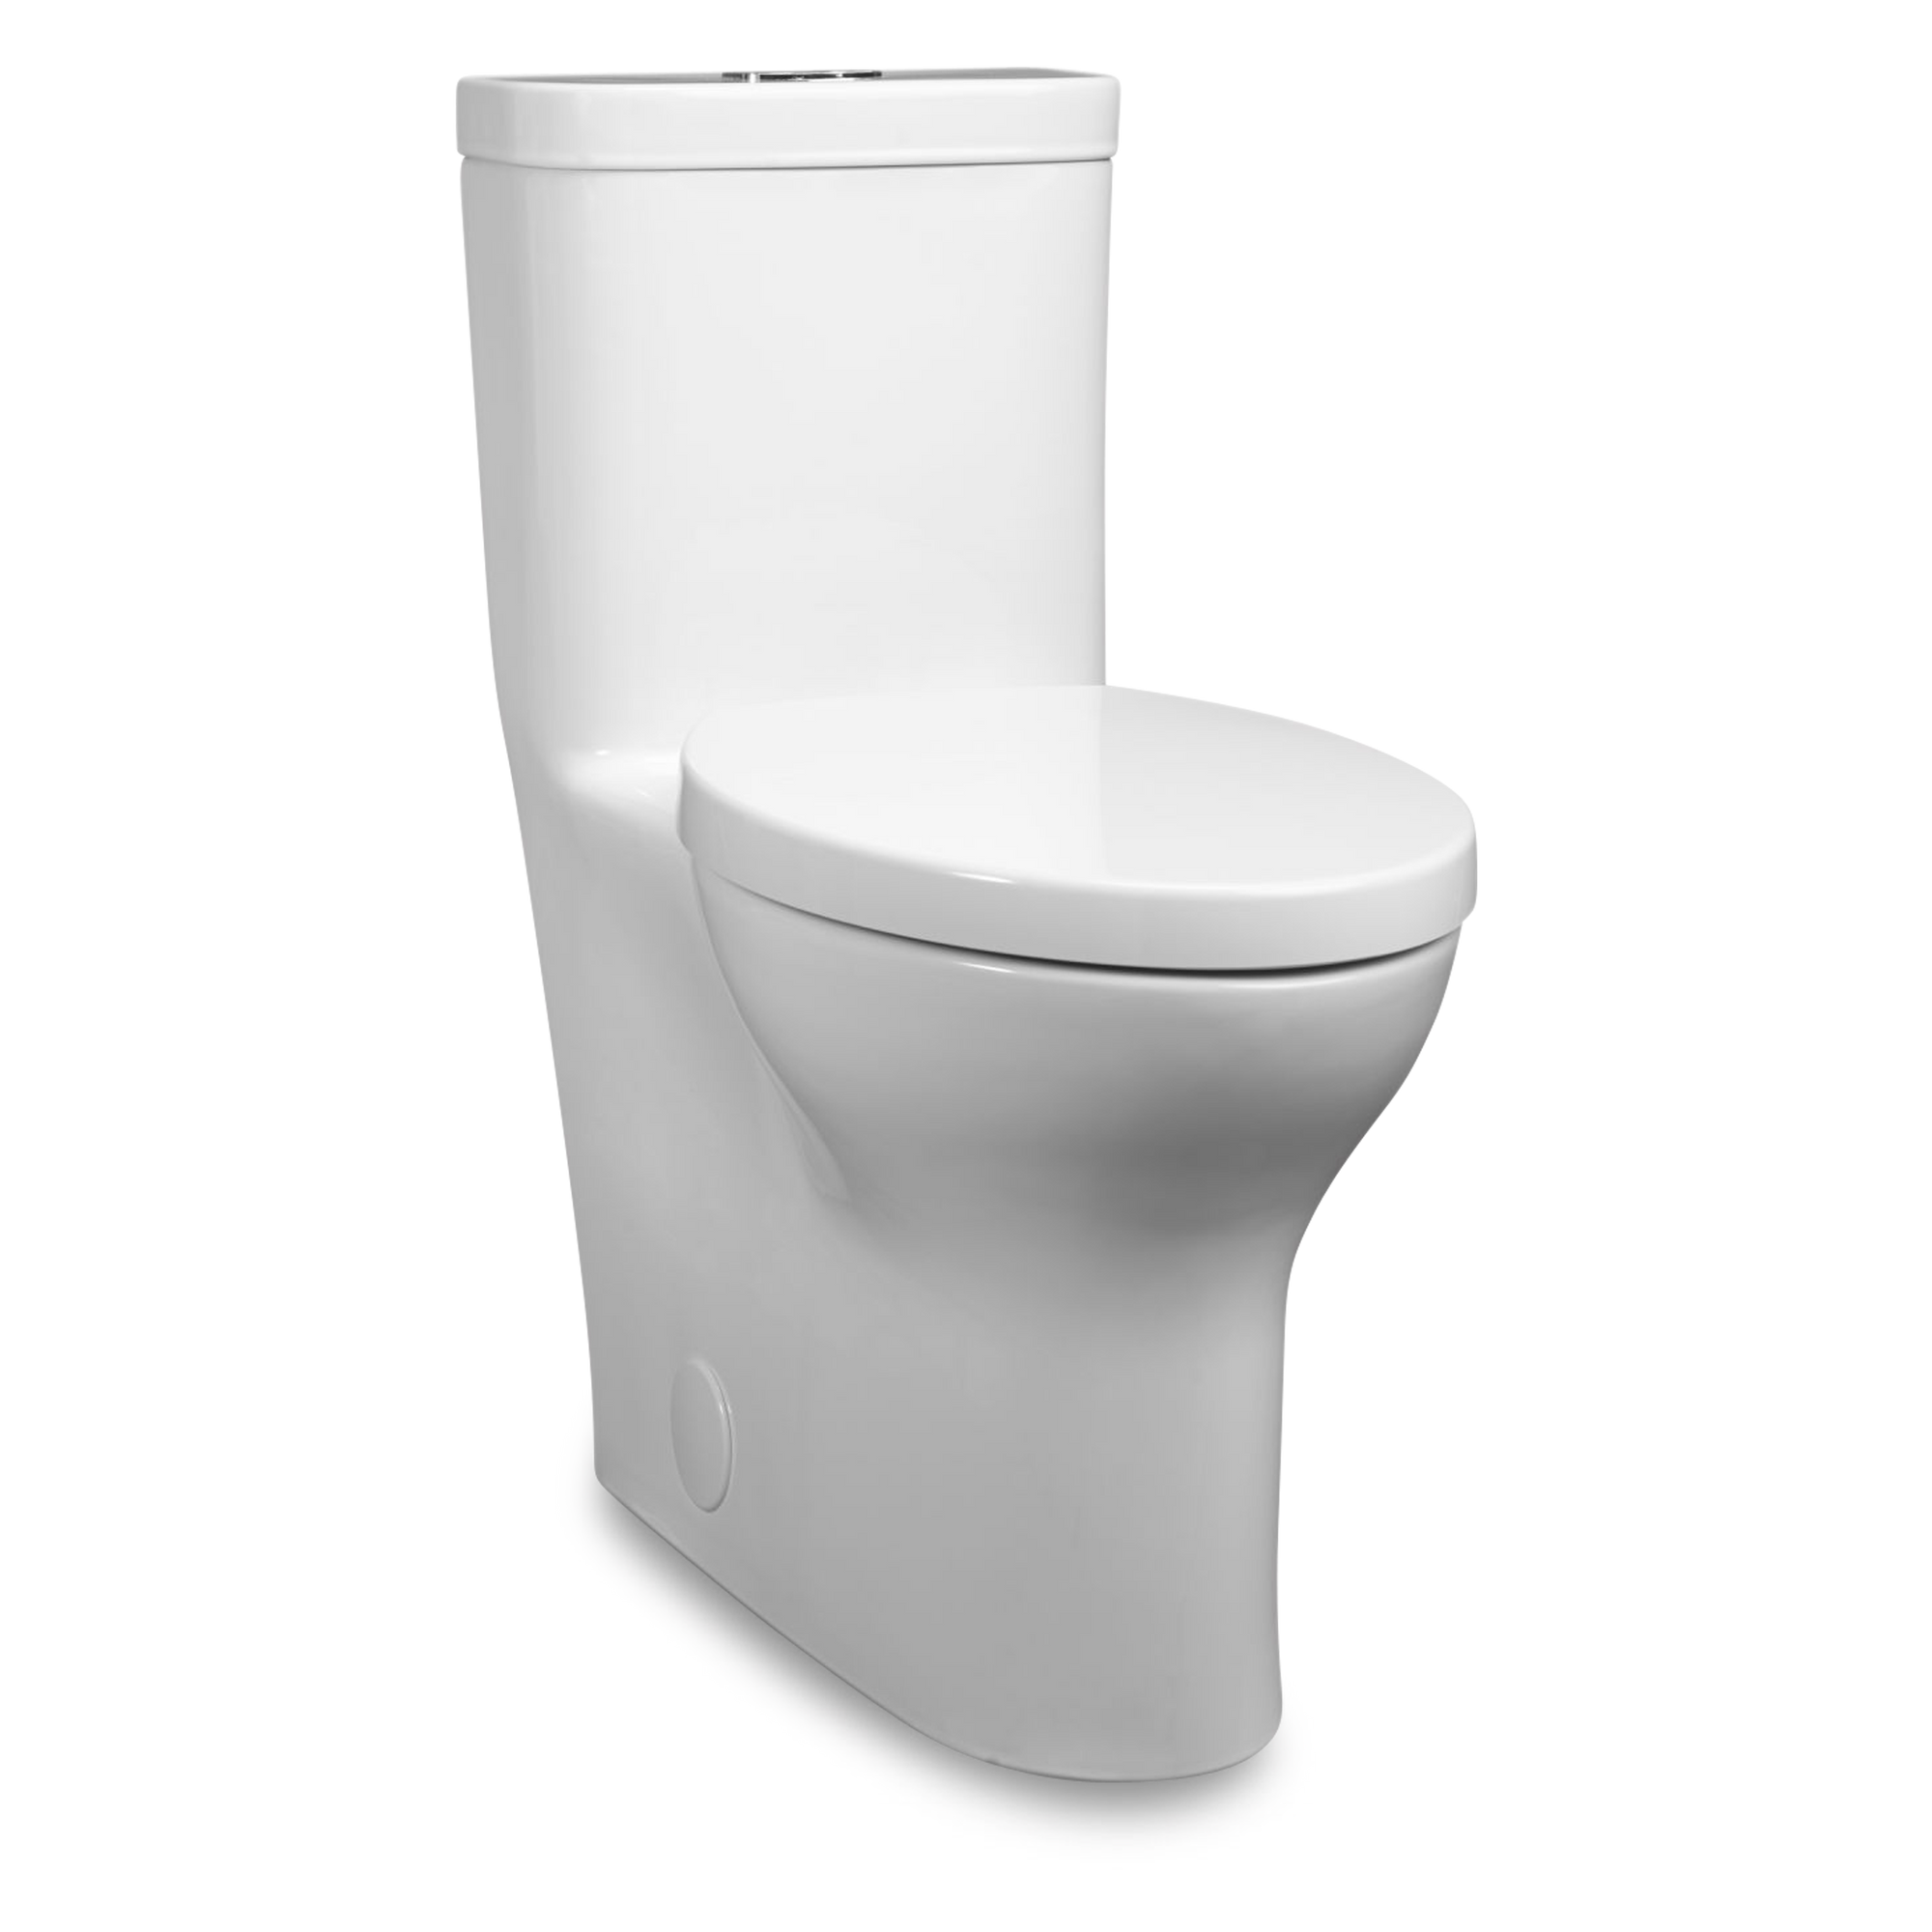 A transitional style one-piece toilet with Slow Close seat.